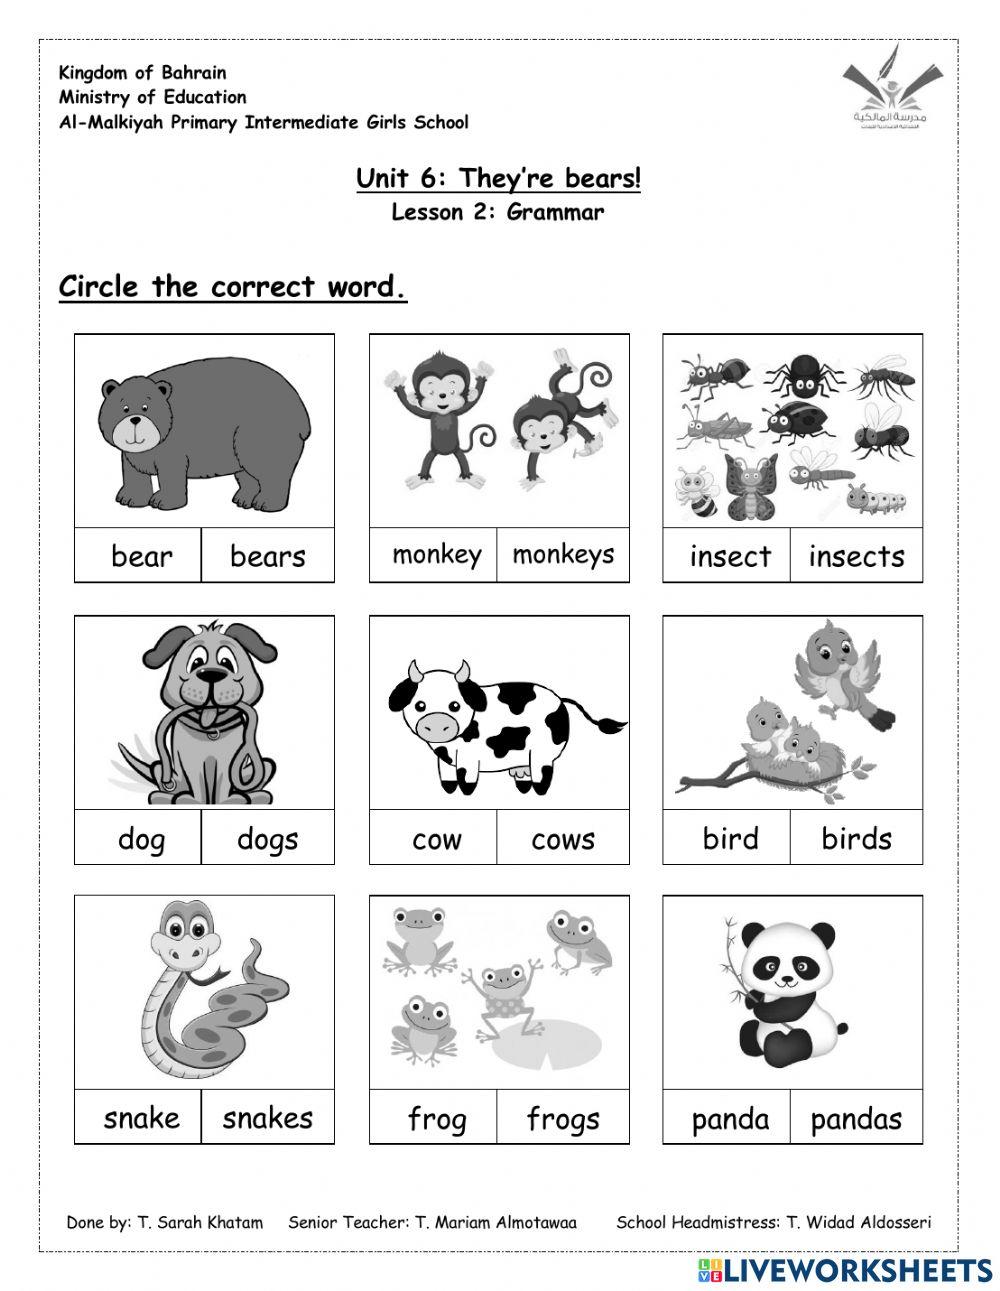 Unit 6: They're bears! Lesson 2